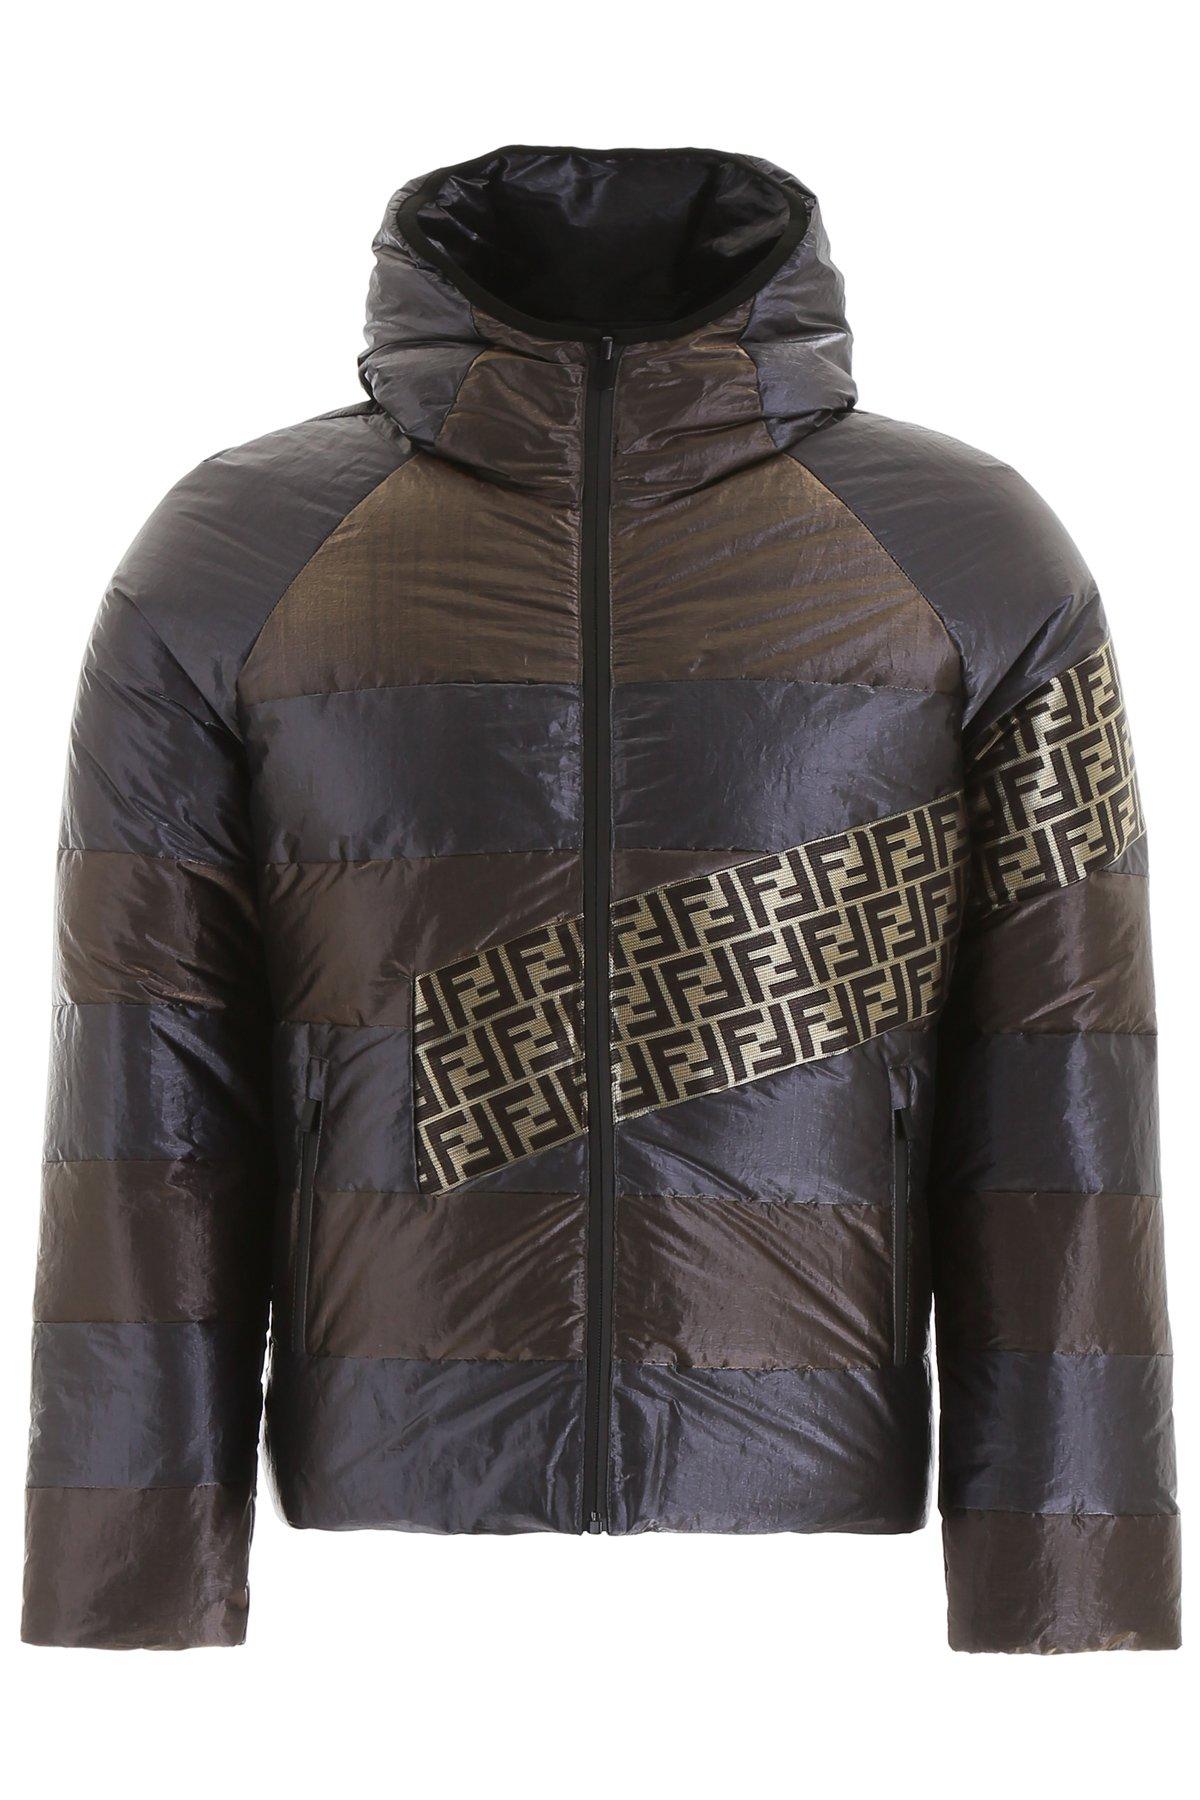 Fendi Synthetic Ff Logo Reversible Puffer Jacket for Men - Save 23% - Lyst